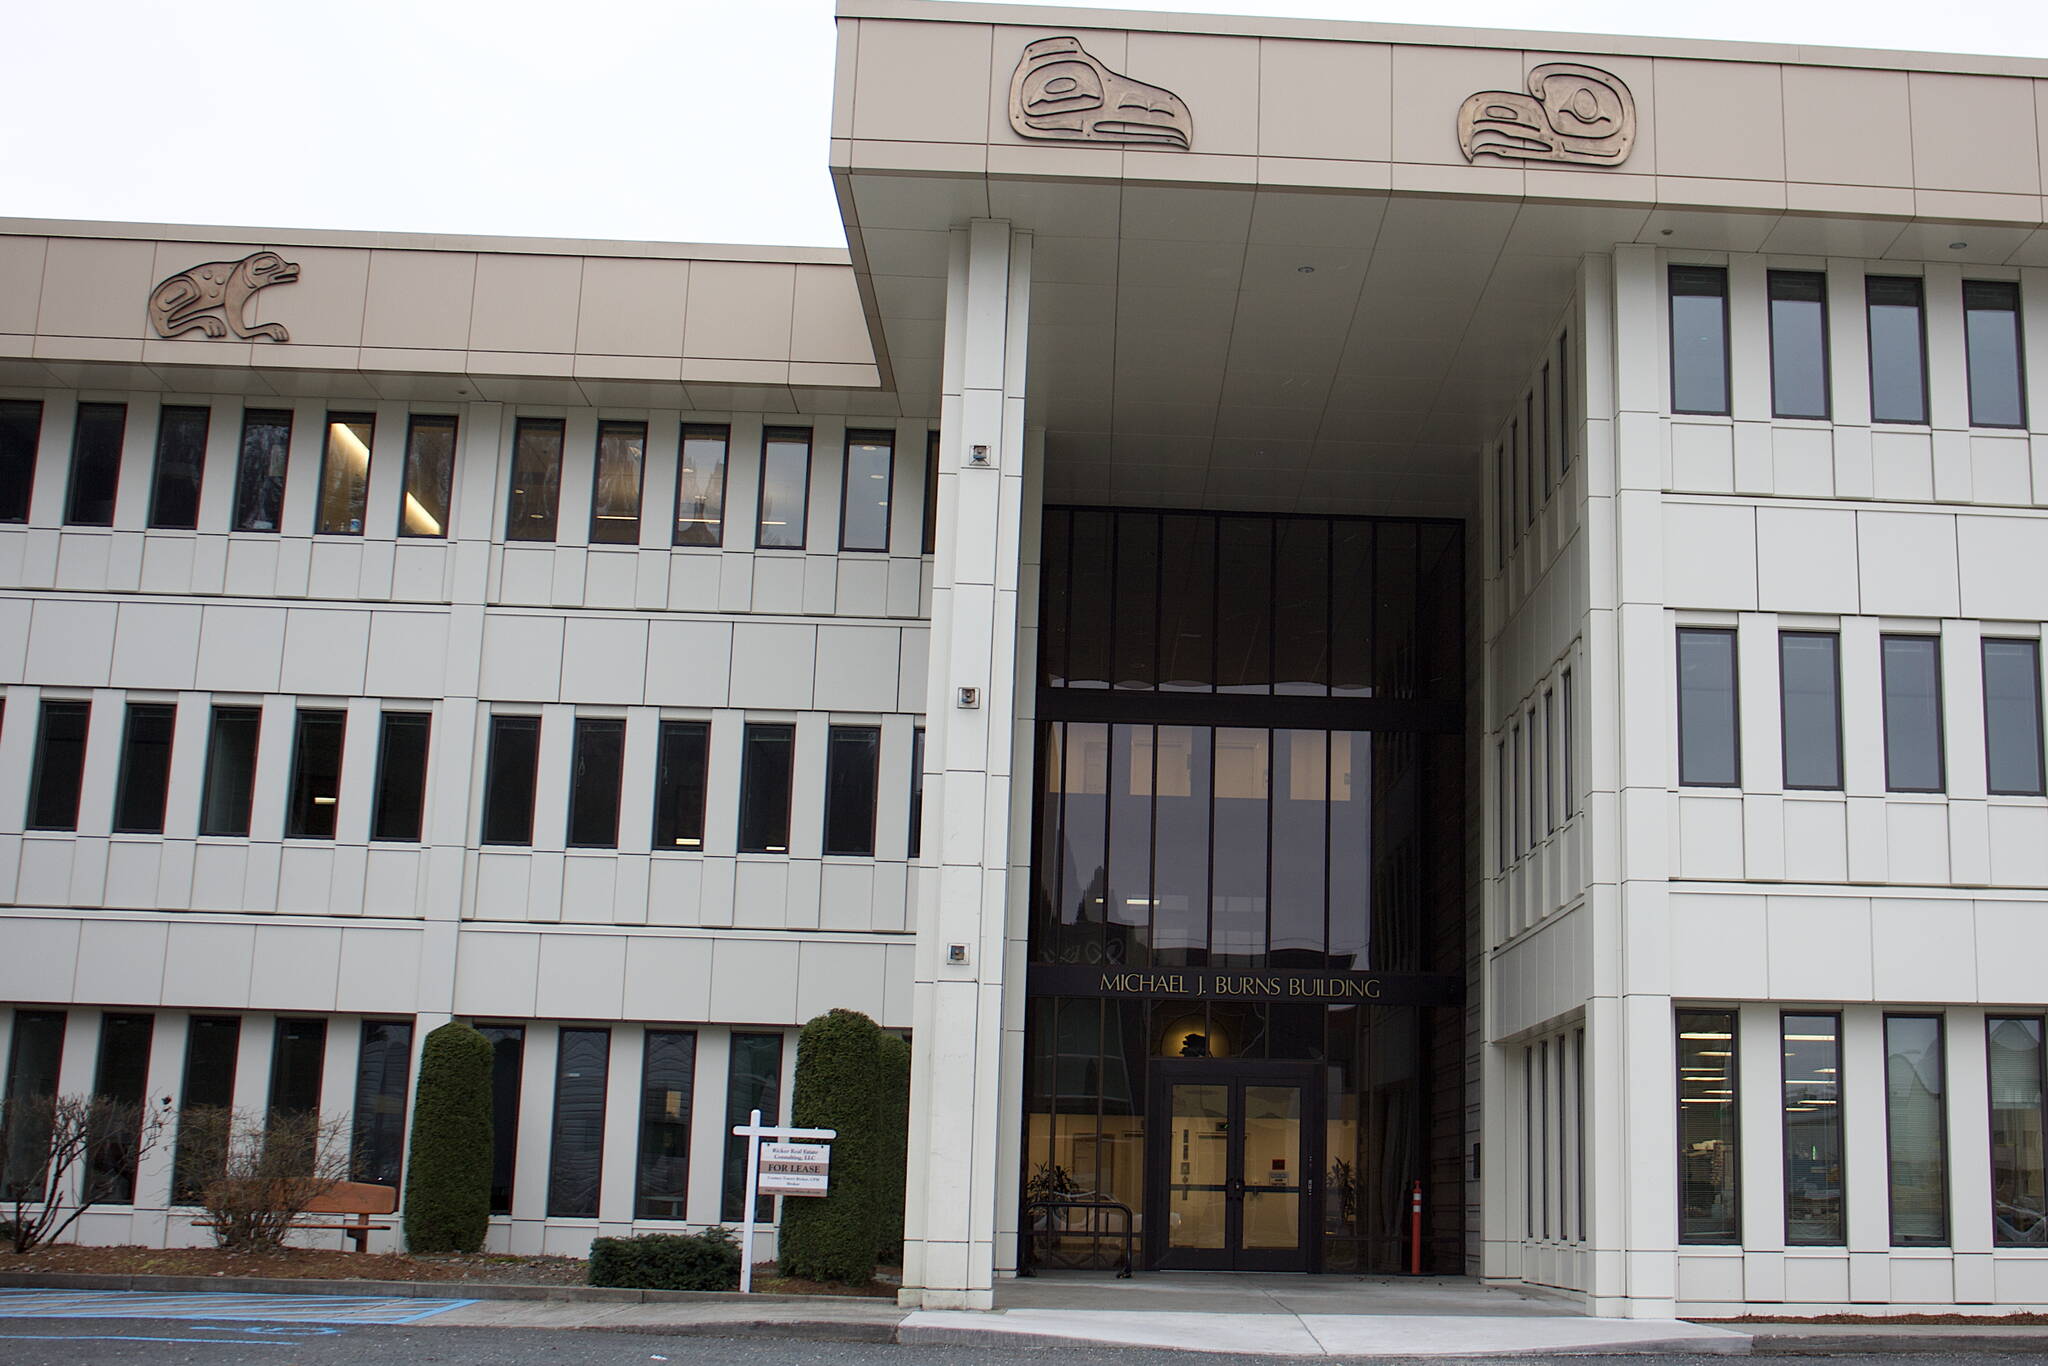 The Michael J. Burns Building, whose tenants include the Alaska Permanent Fund Corp., is being evaluated as a relocation site for some or all of the City and Borough of Juneau’s downtown offices, including the Assembly Chambers. (Mark Sabbatini / Juneau Empire file photo)